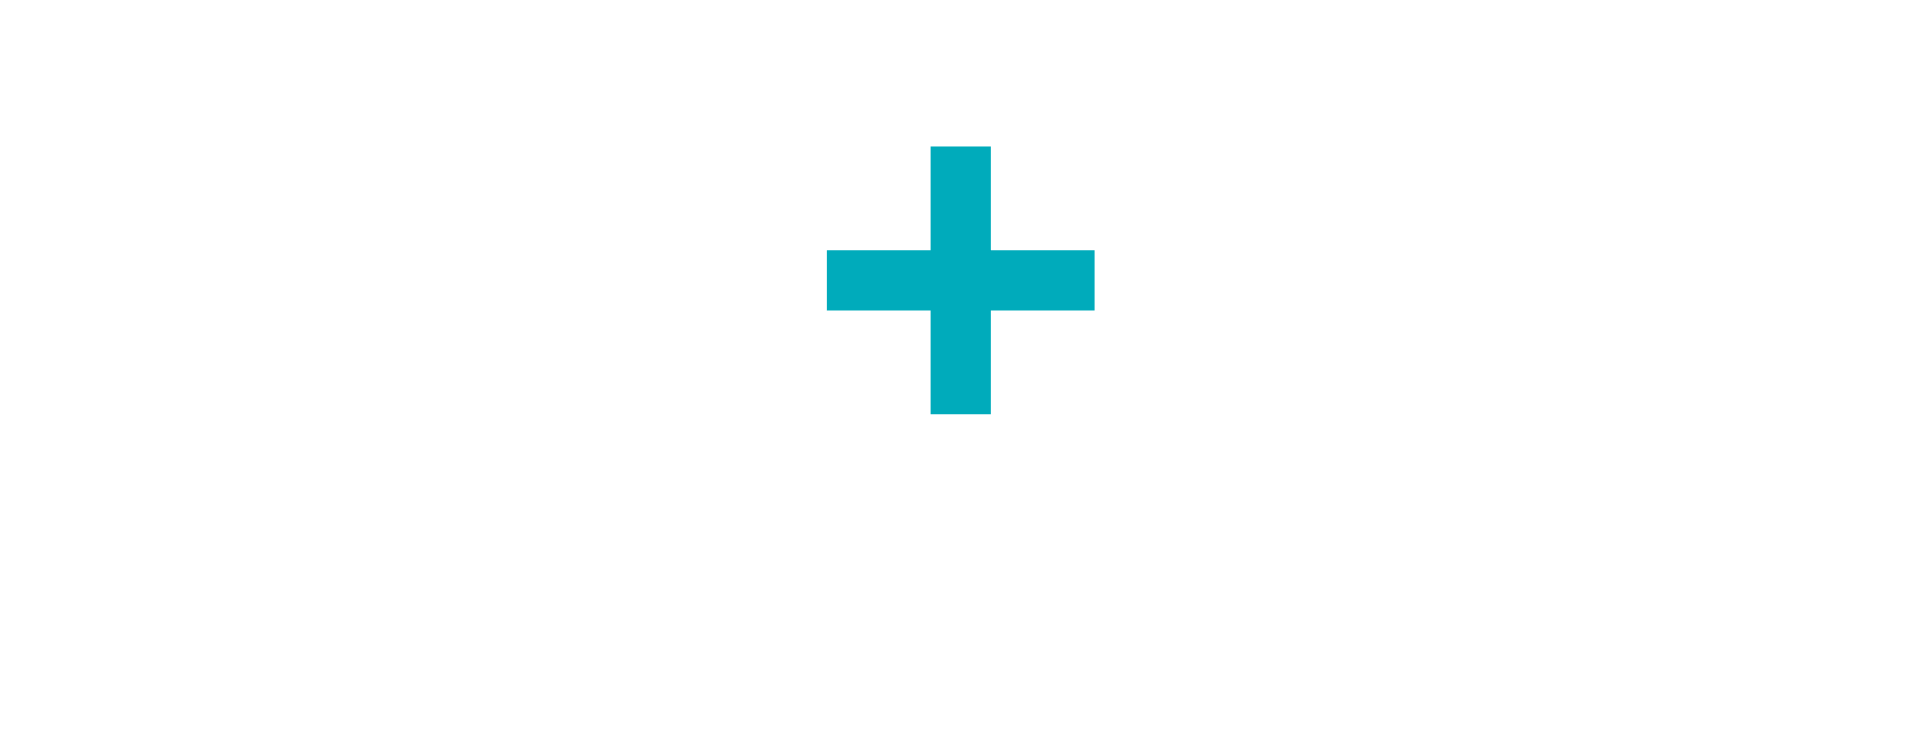 Internists of Central PA Logo